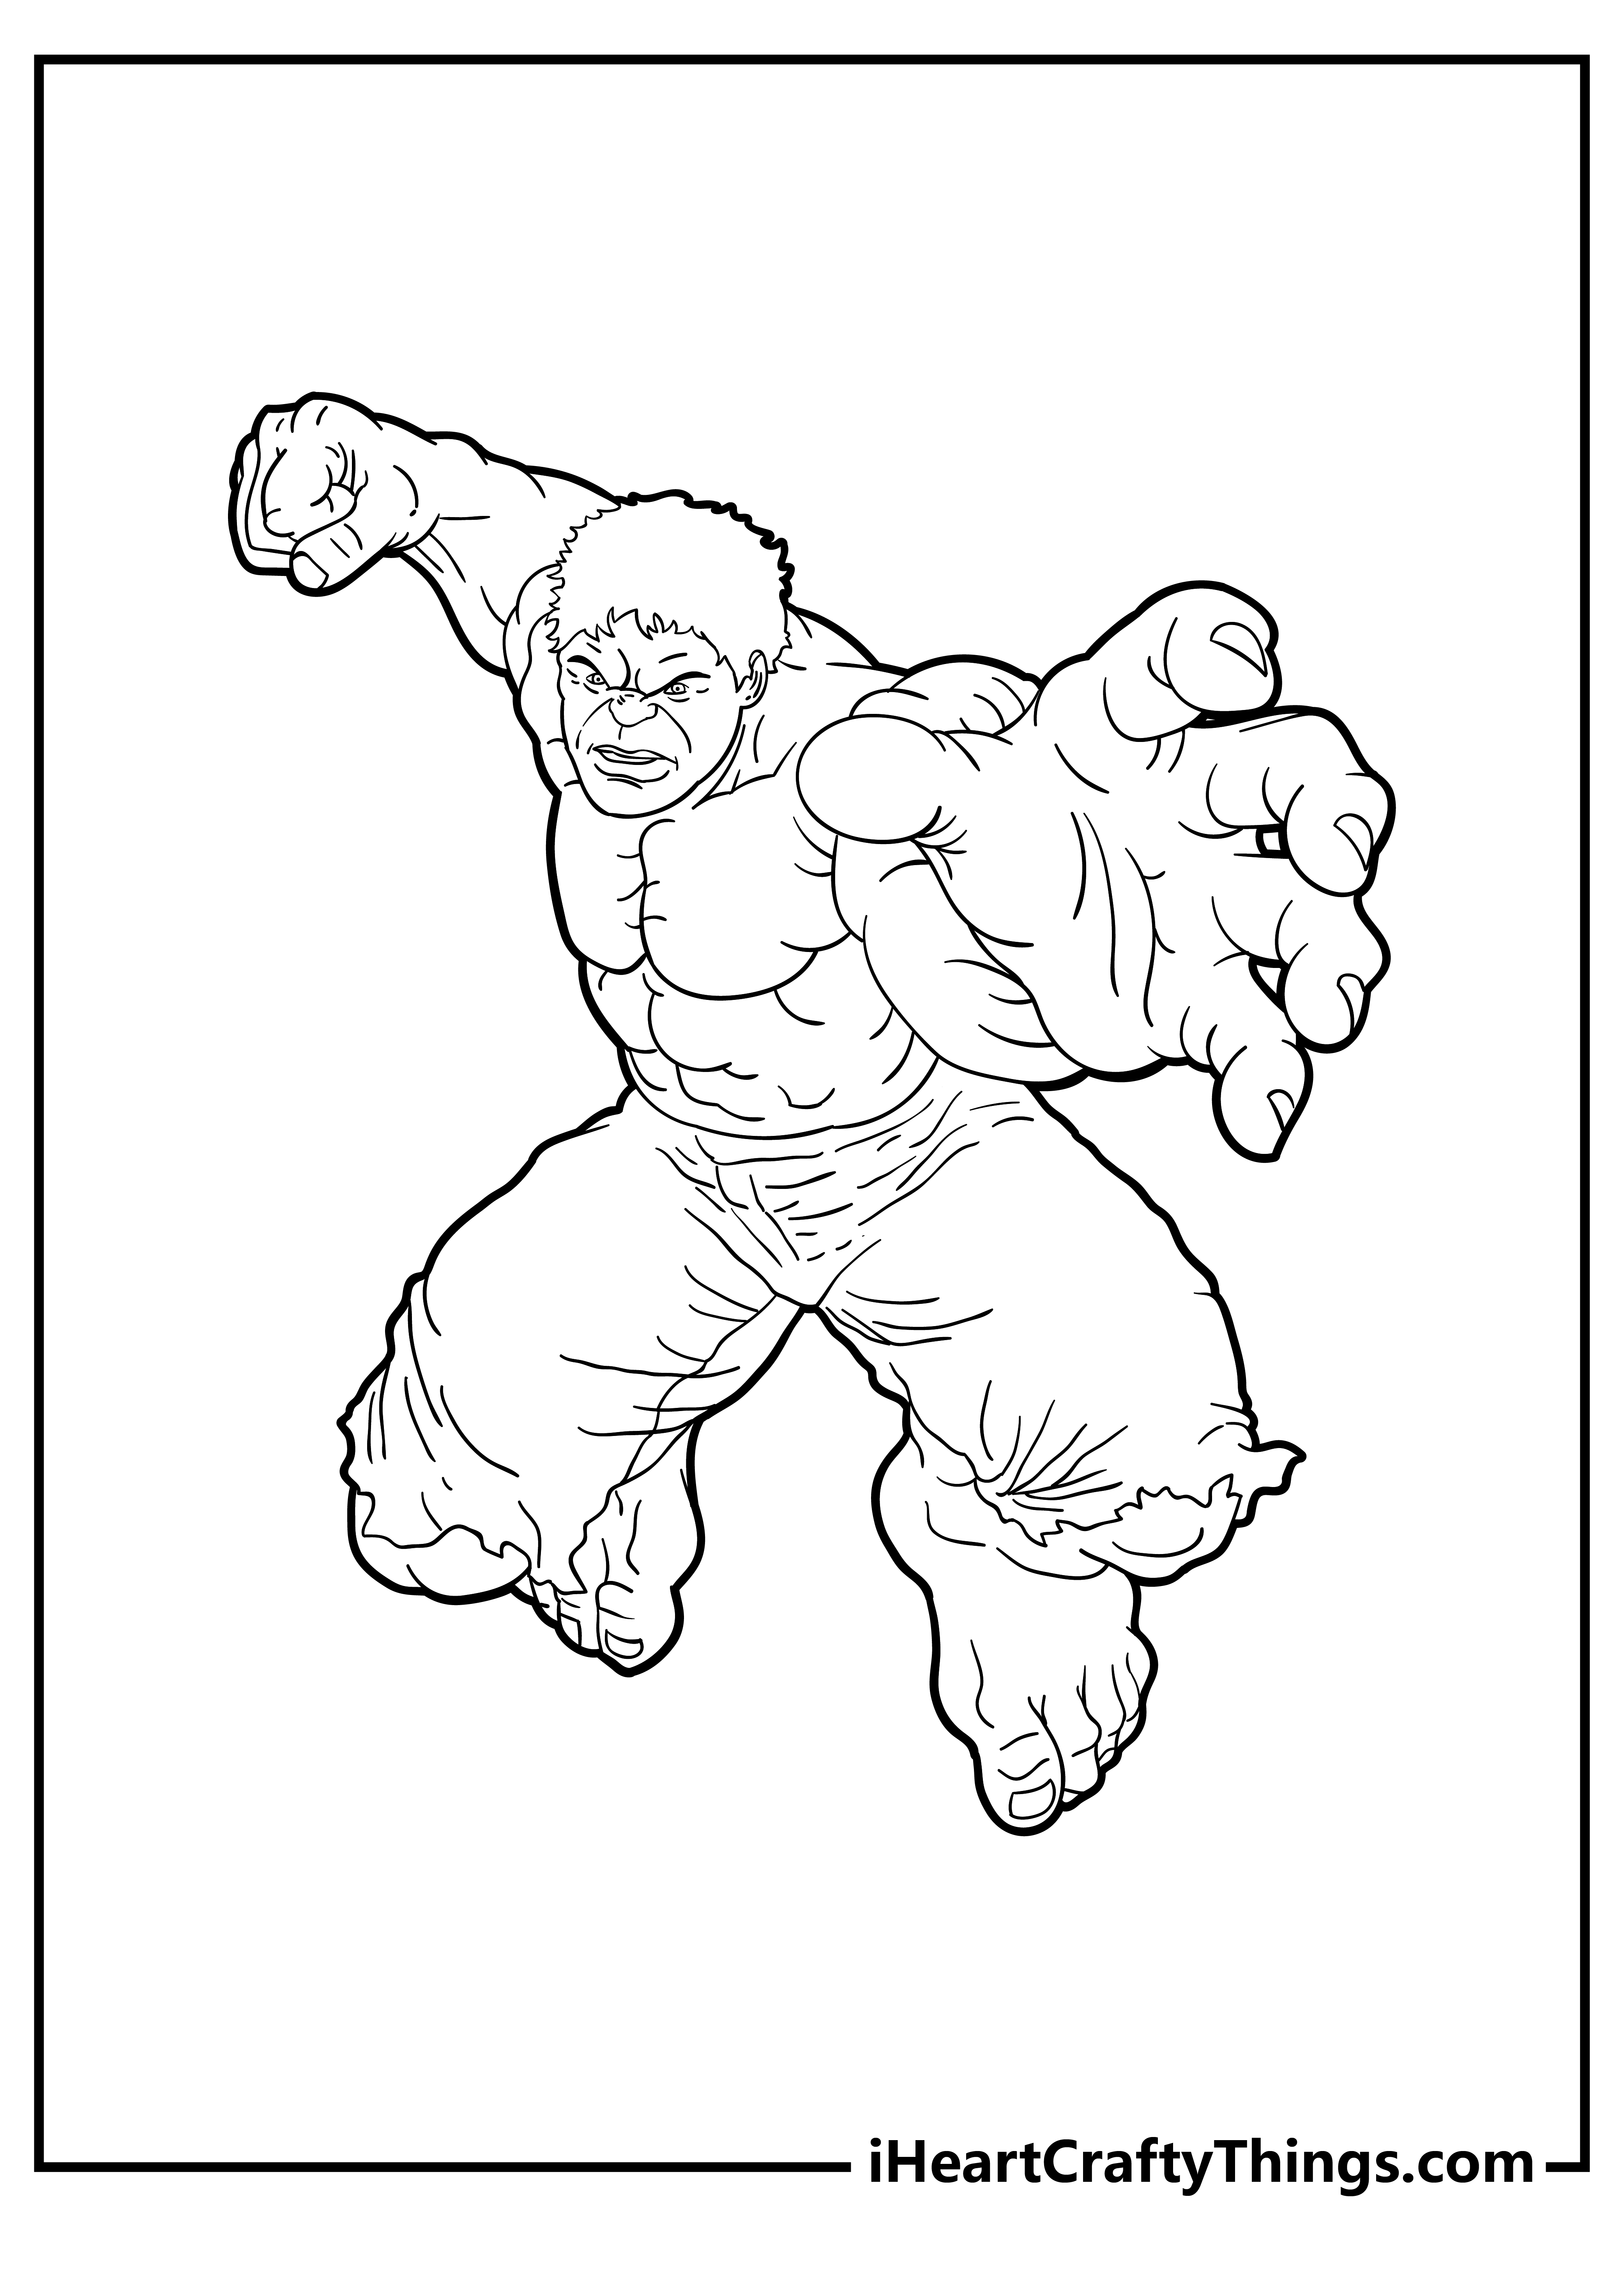 Hulk Coloring Book for adults free download